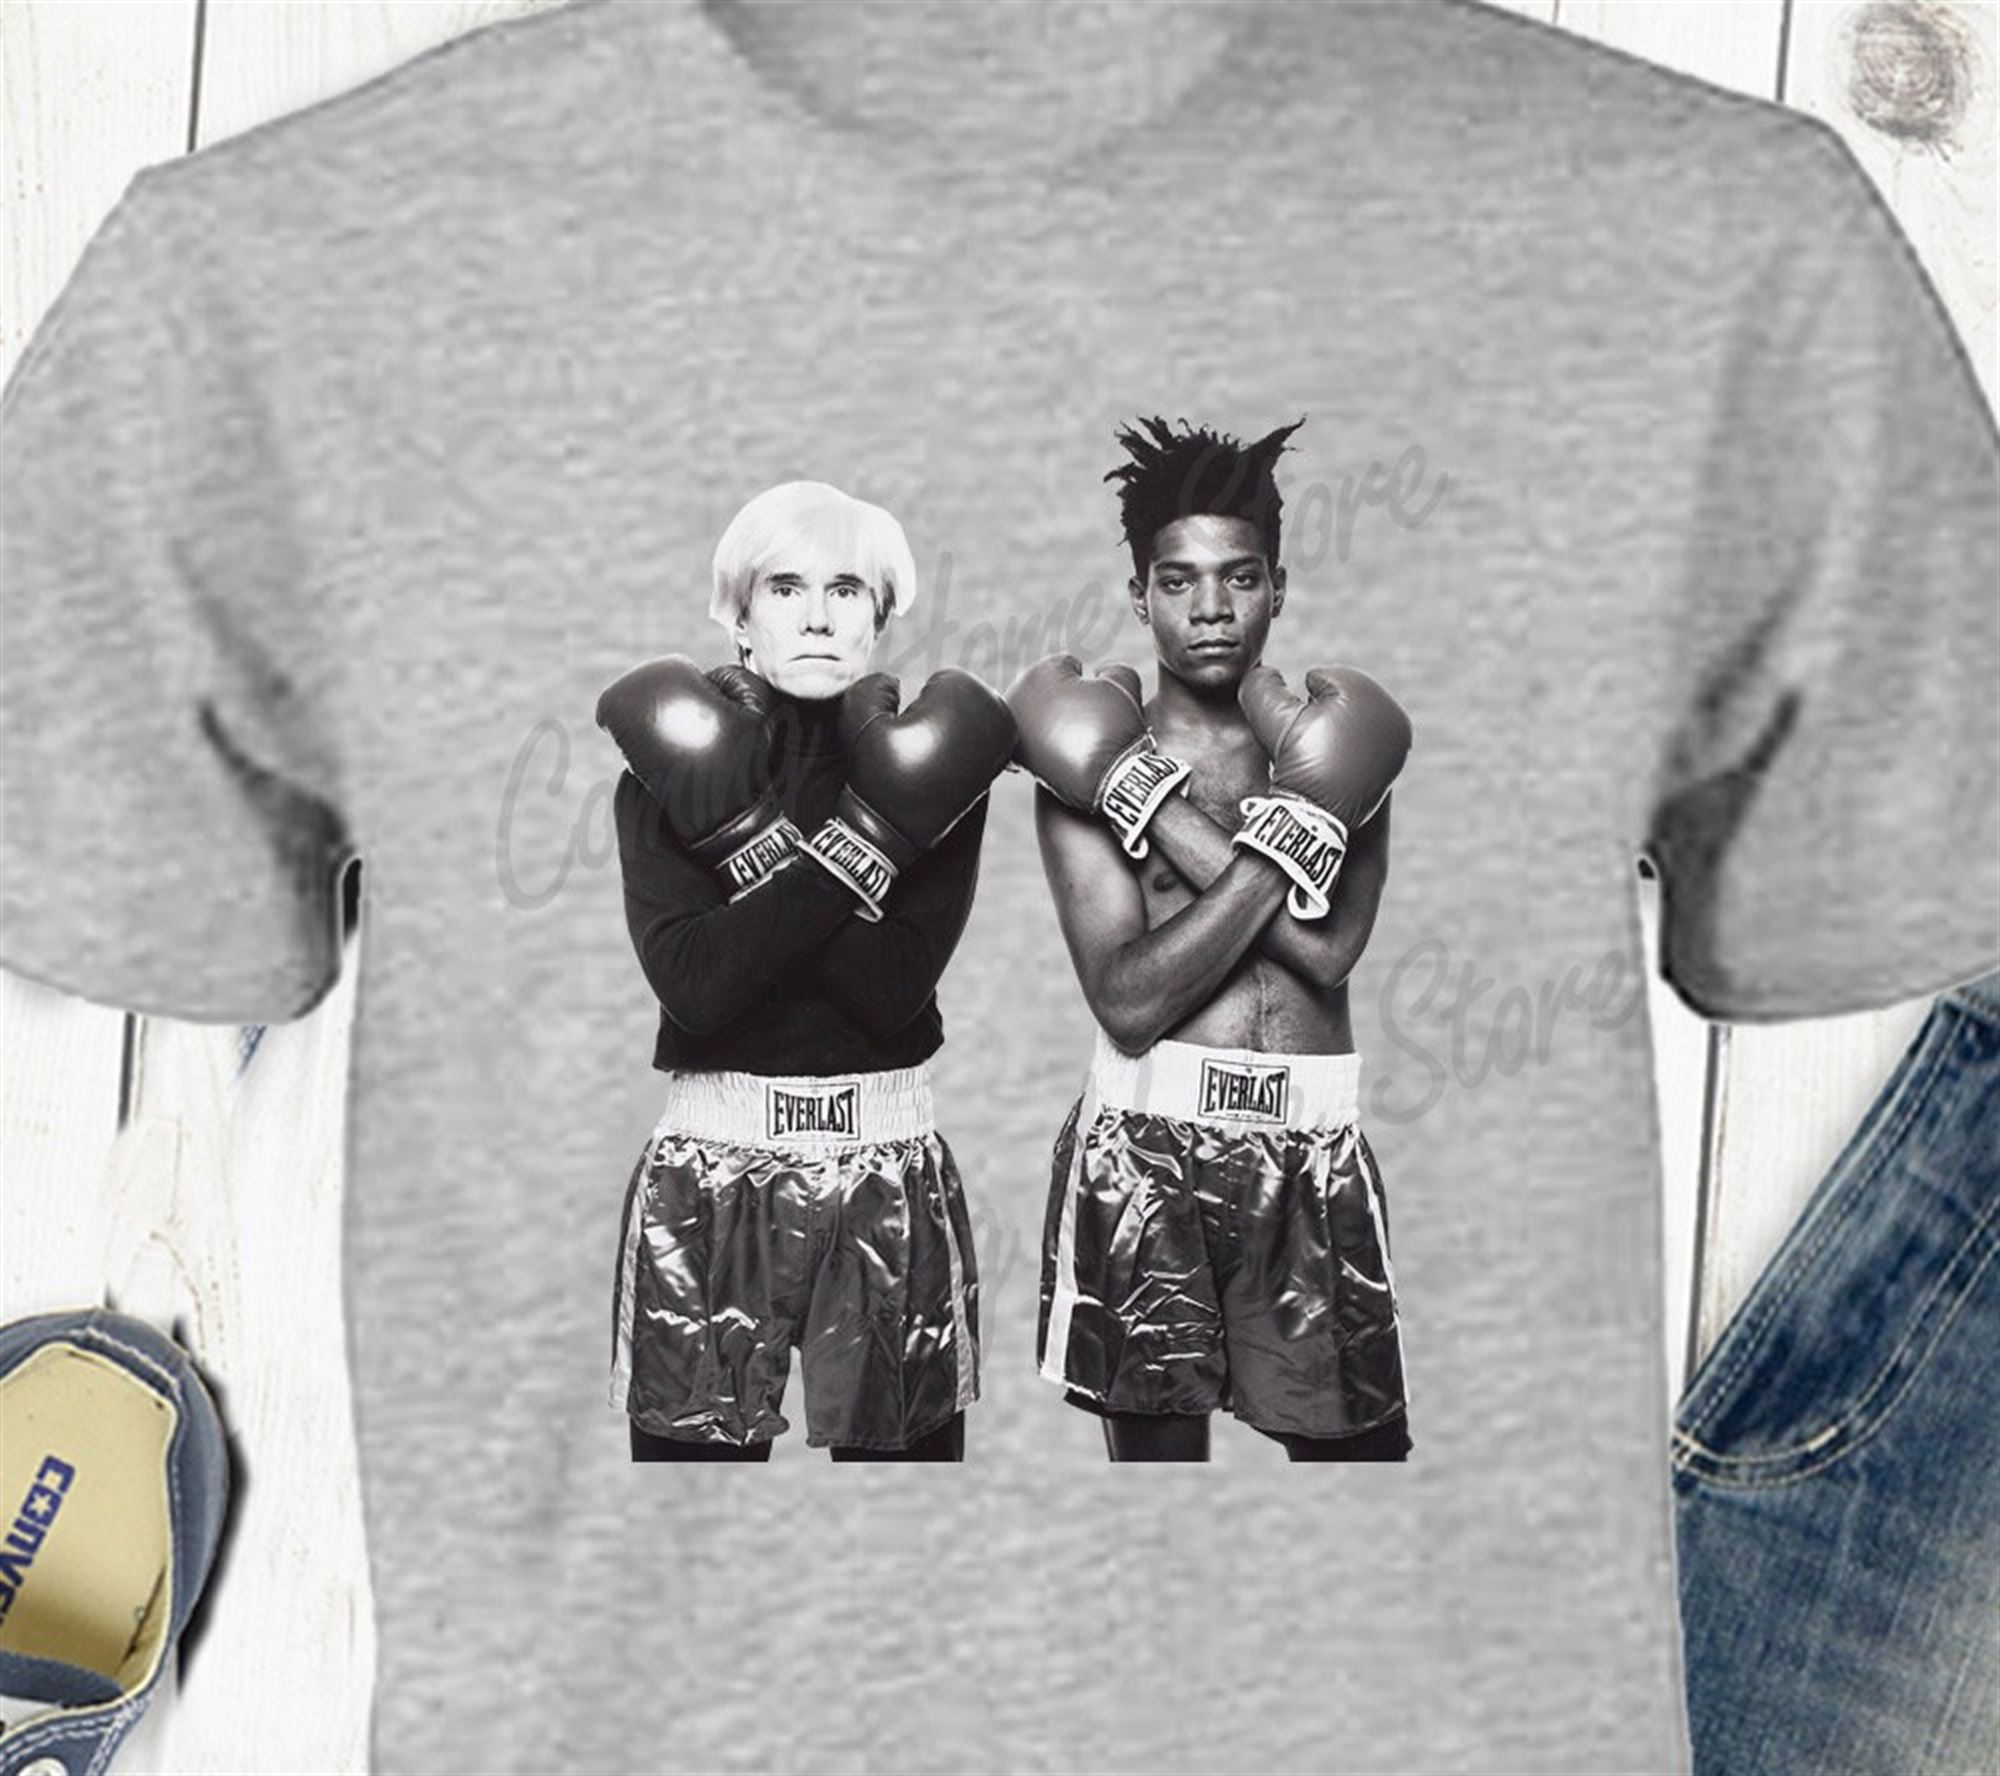 Andy Warhol And Jean Michel Basquiat Boxing T-shirt Unisex And Women Size Tee More Colors